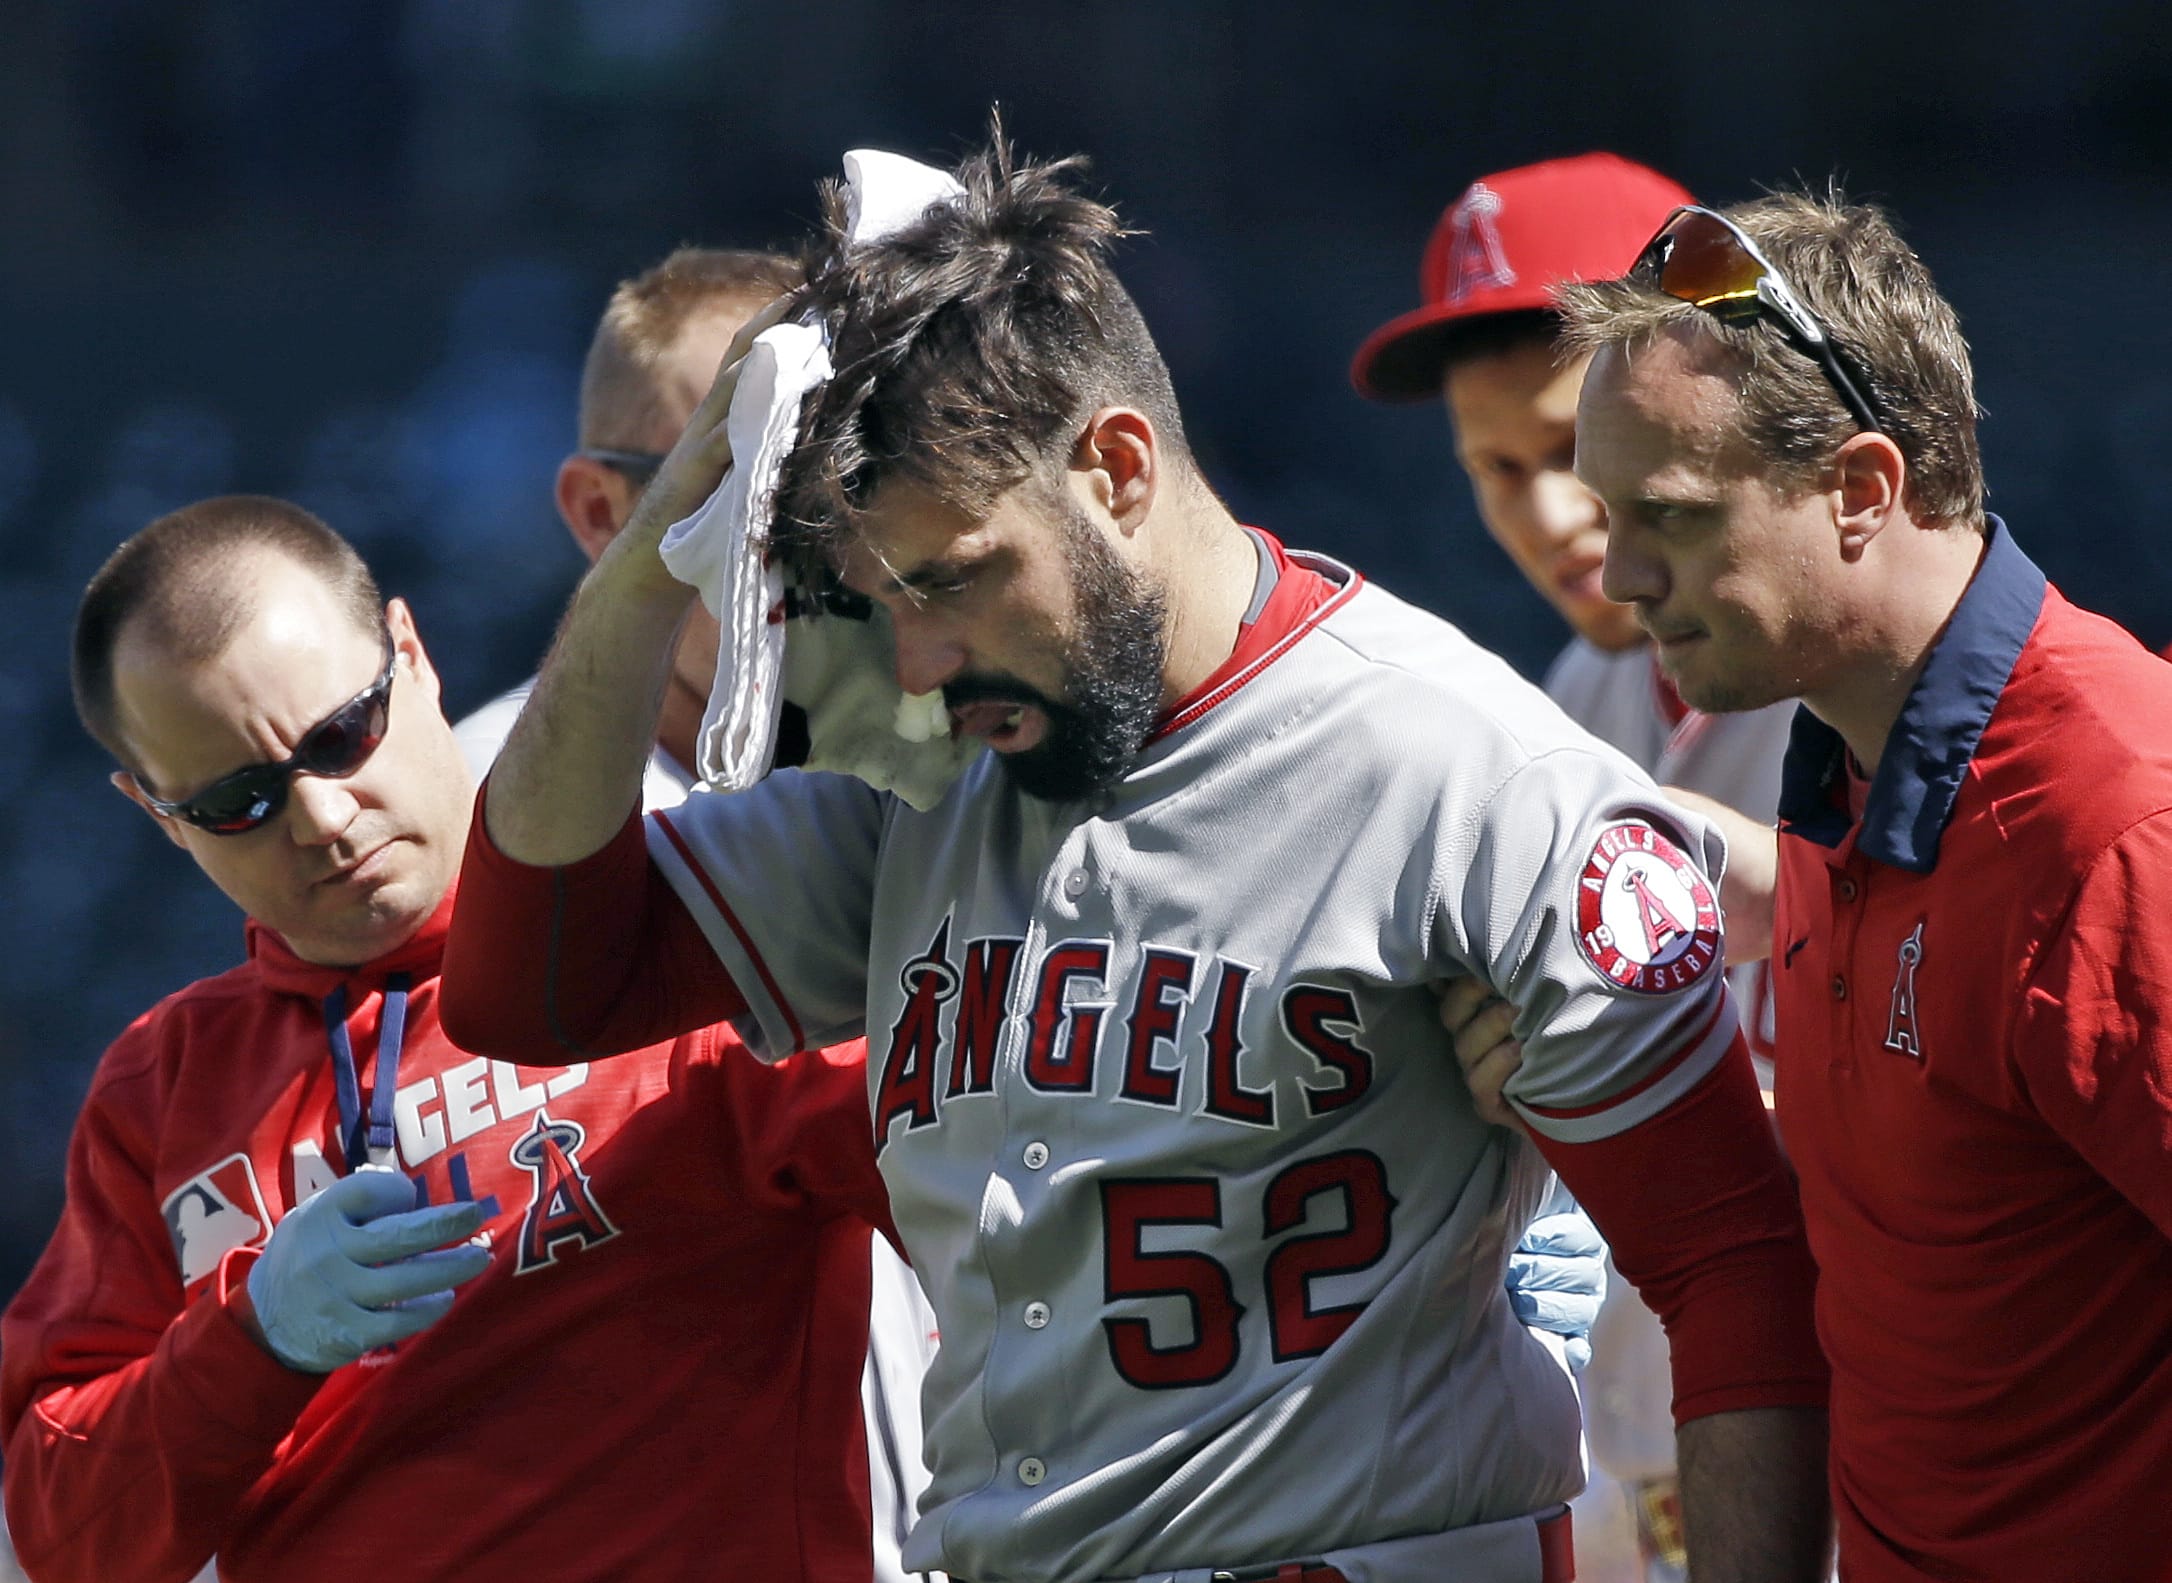 Los Angeles Angels starting pitcher Matt Shoemaker is assisted off the field after being hit by a line drive from Seattle Mariners' Kyle Seager in the second inning of a baseball game, Sunday, Sept. 4, 2016, in Seattle.